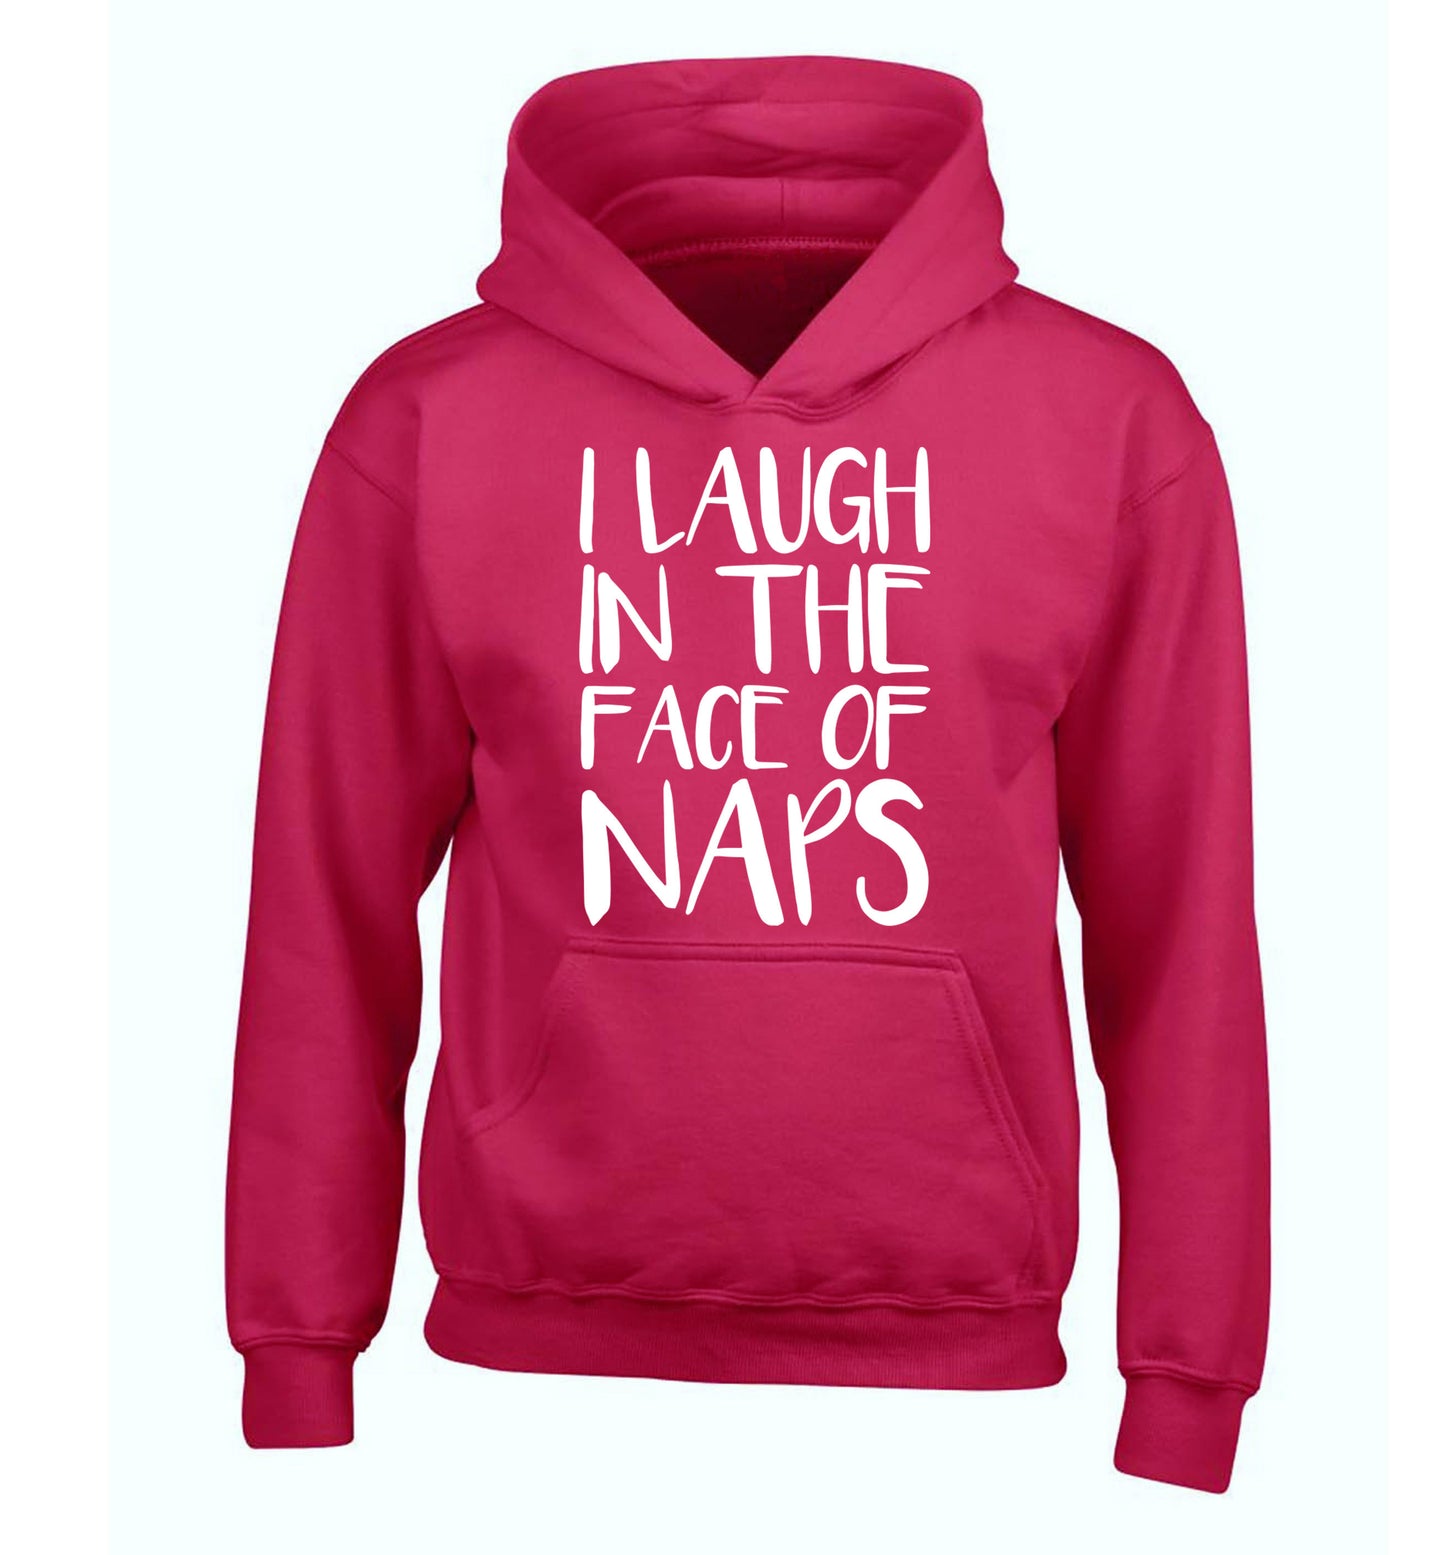 I laugh in the face of naps children's pink hoodie 12-14 Years